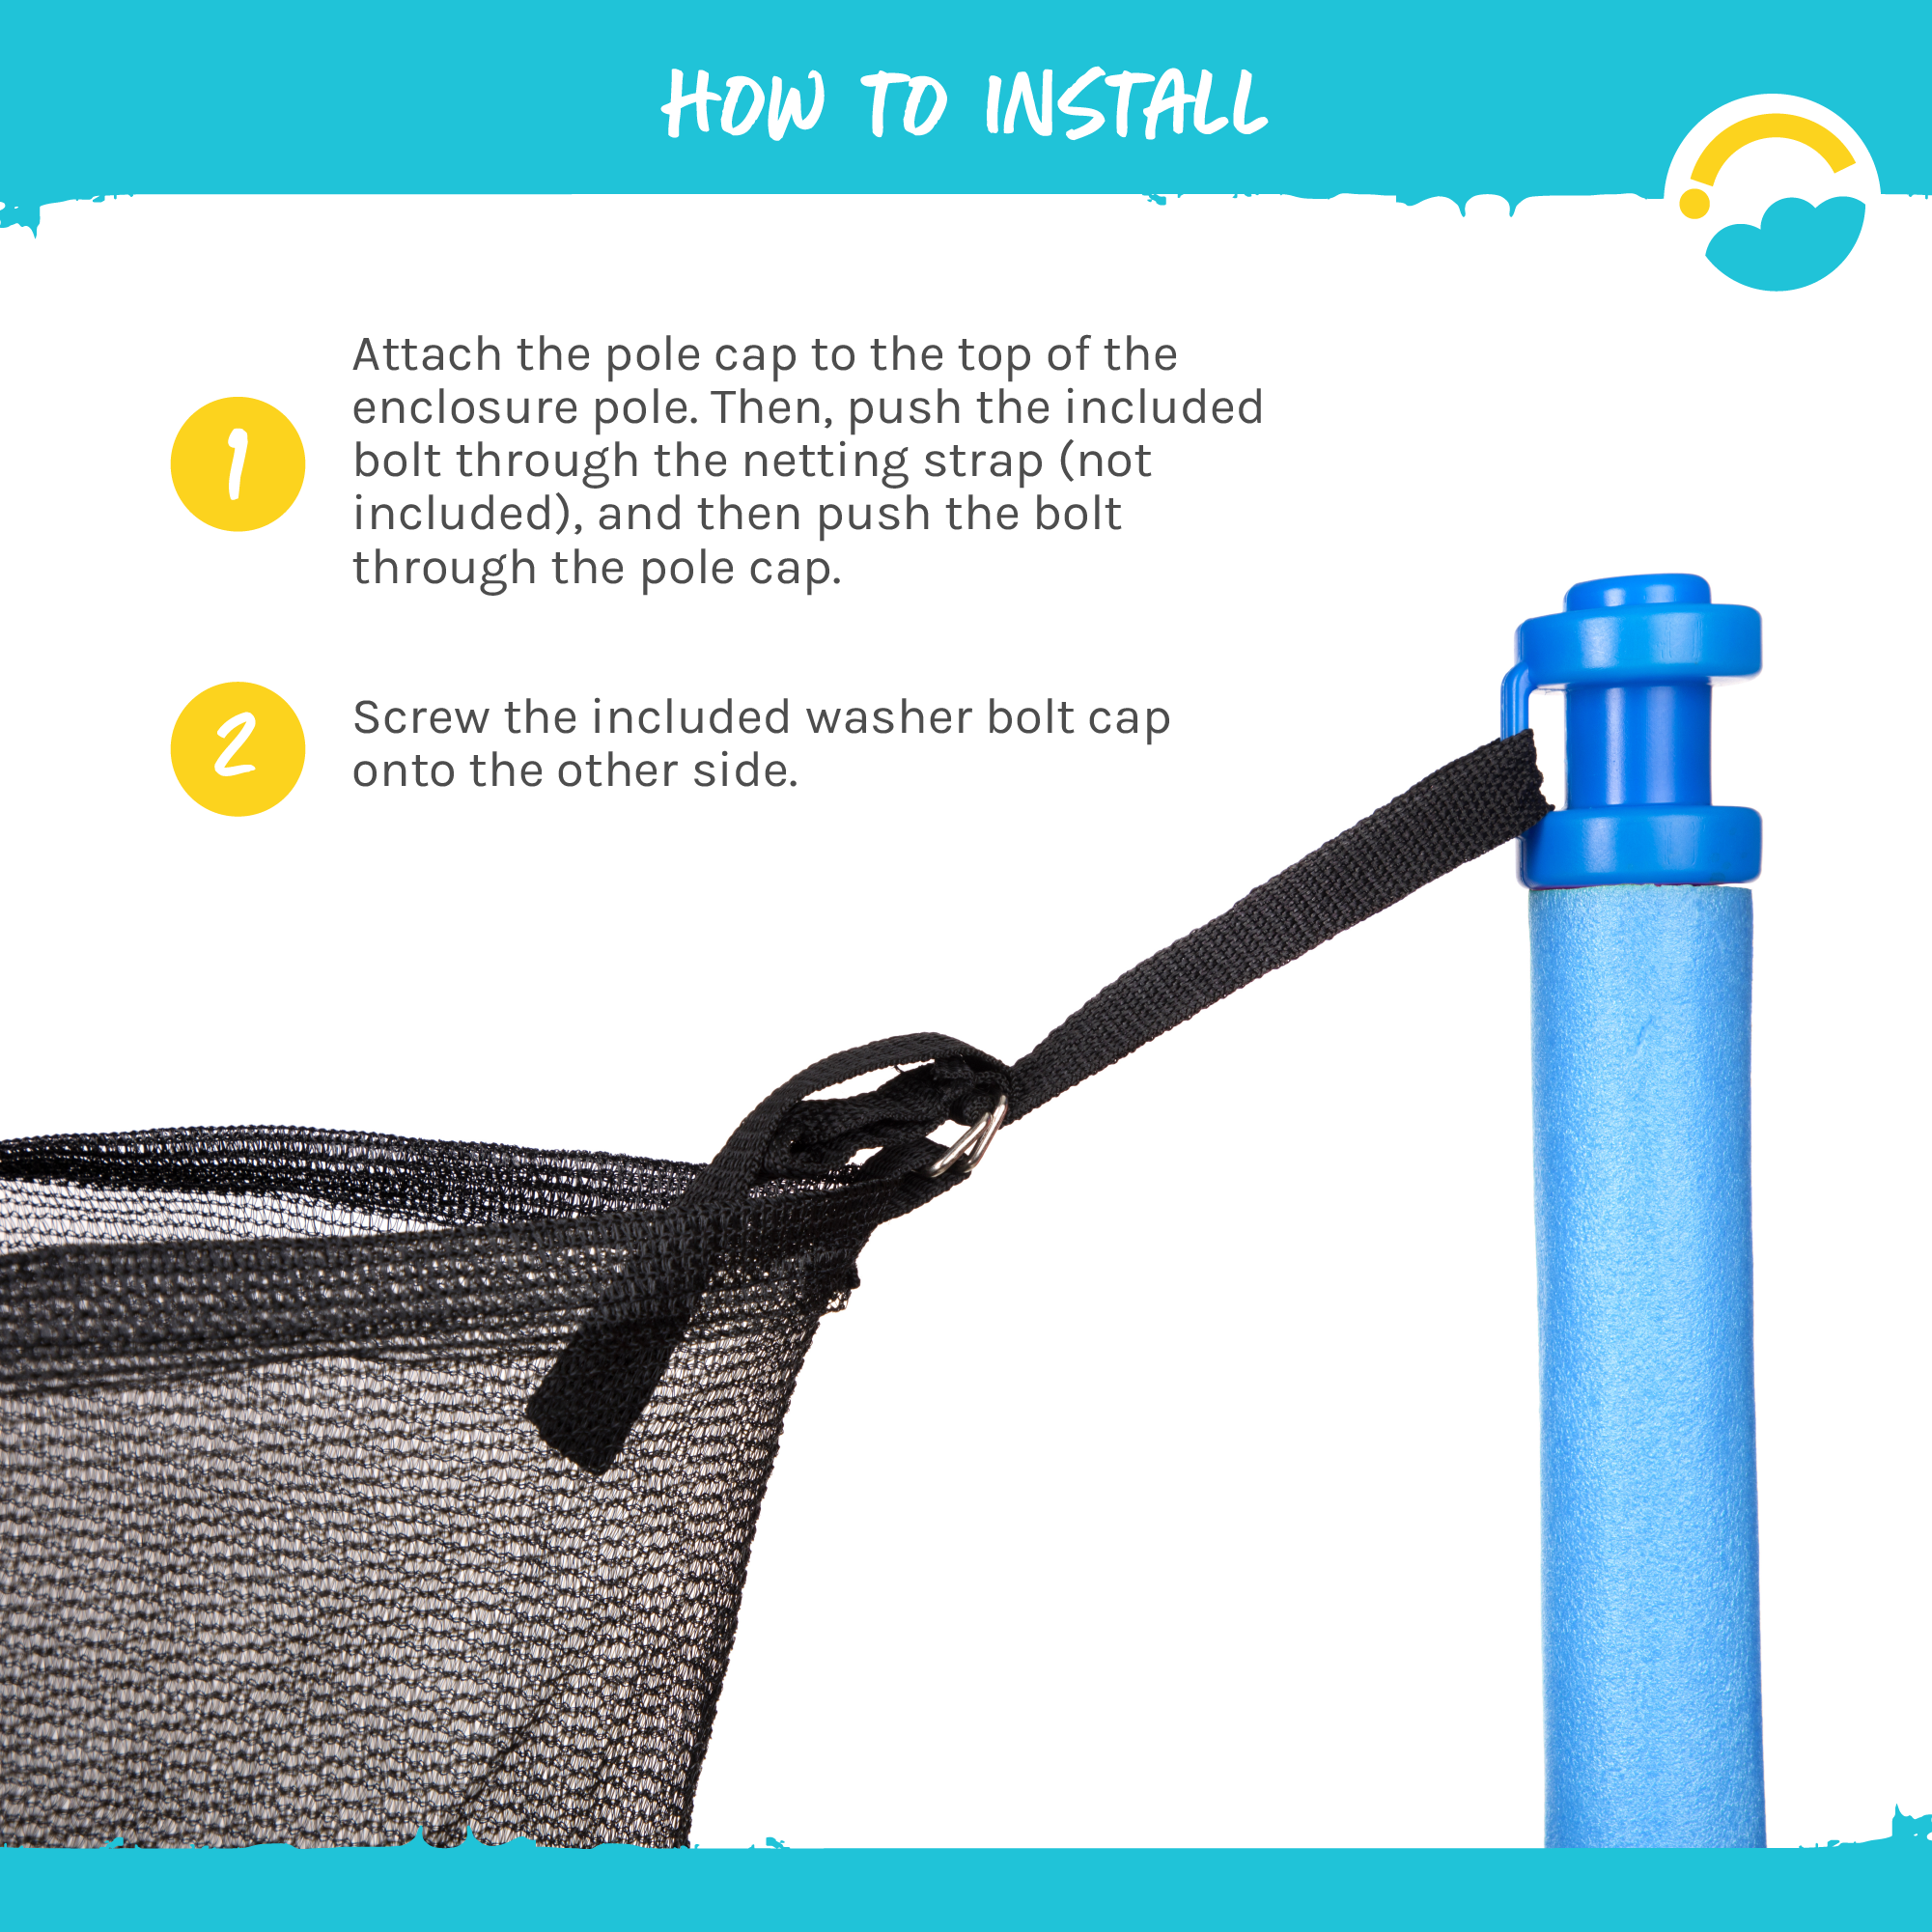 How to Install: 1-Attach the pole cap to the top of the enclosure pole.  Then, push the included bolt through the netting strap (not included), and then push the bolt through the pole cap.  2-Screw the included washer bolt cap onto the other side.  